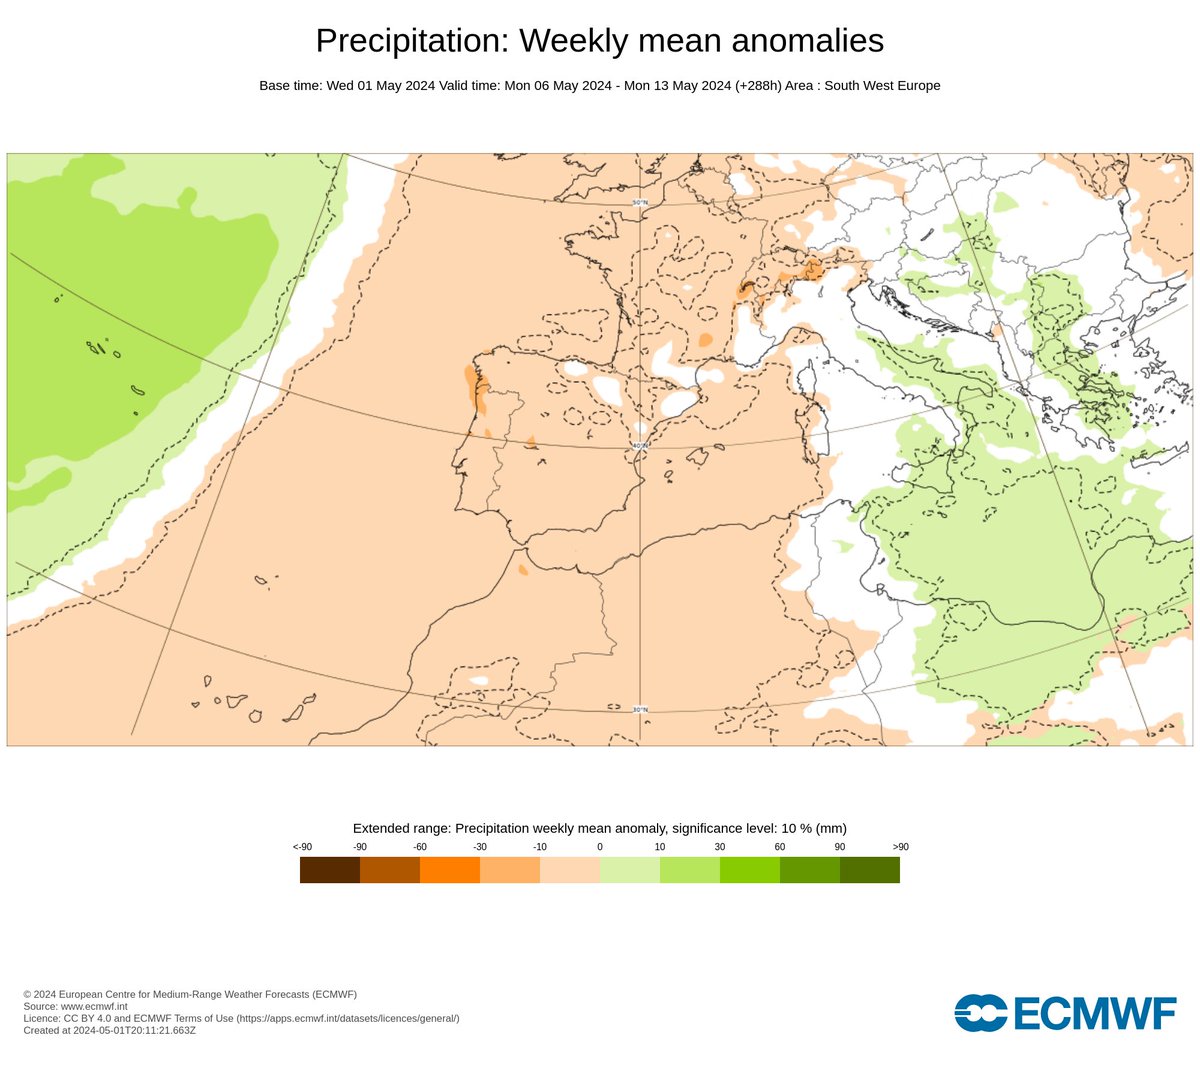 #Gibraltar and local area - 03/05 - a quick look ahead at the forecast... and the trend is for temperatures to warm further into the weekend, with the latest #ECMWF Precipitation forecast signalling a lot of dry weather, and just hinting at a low risk of any rain next week.…